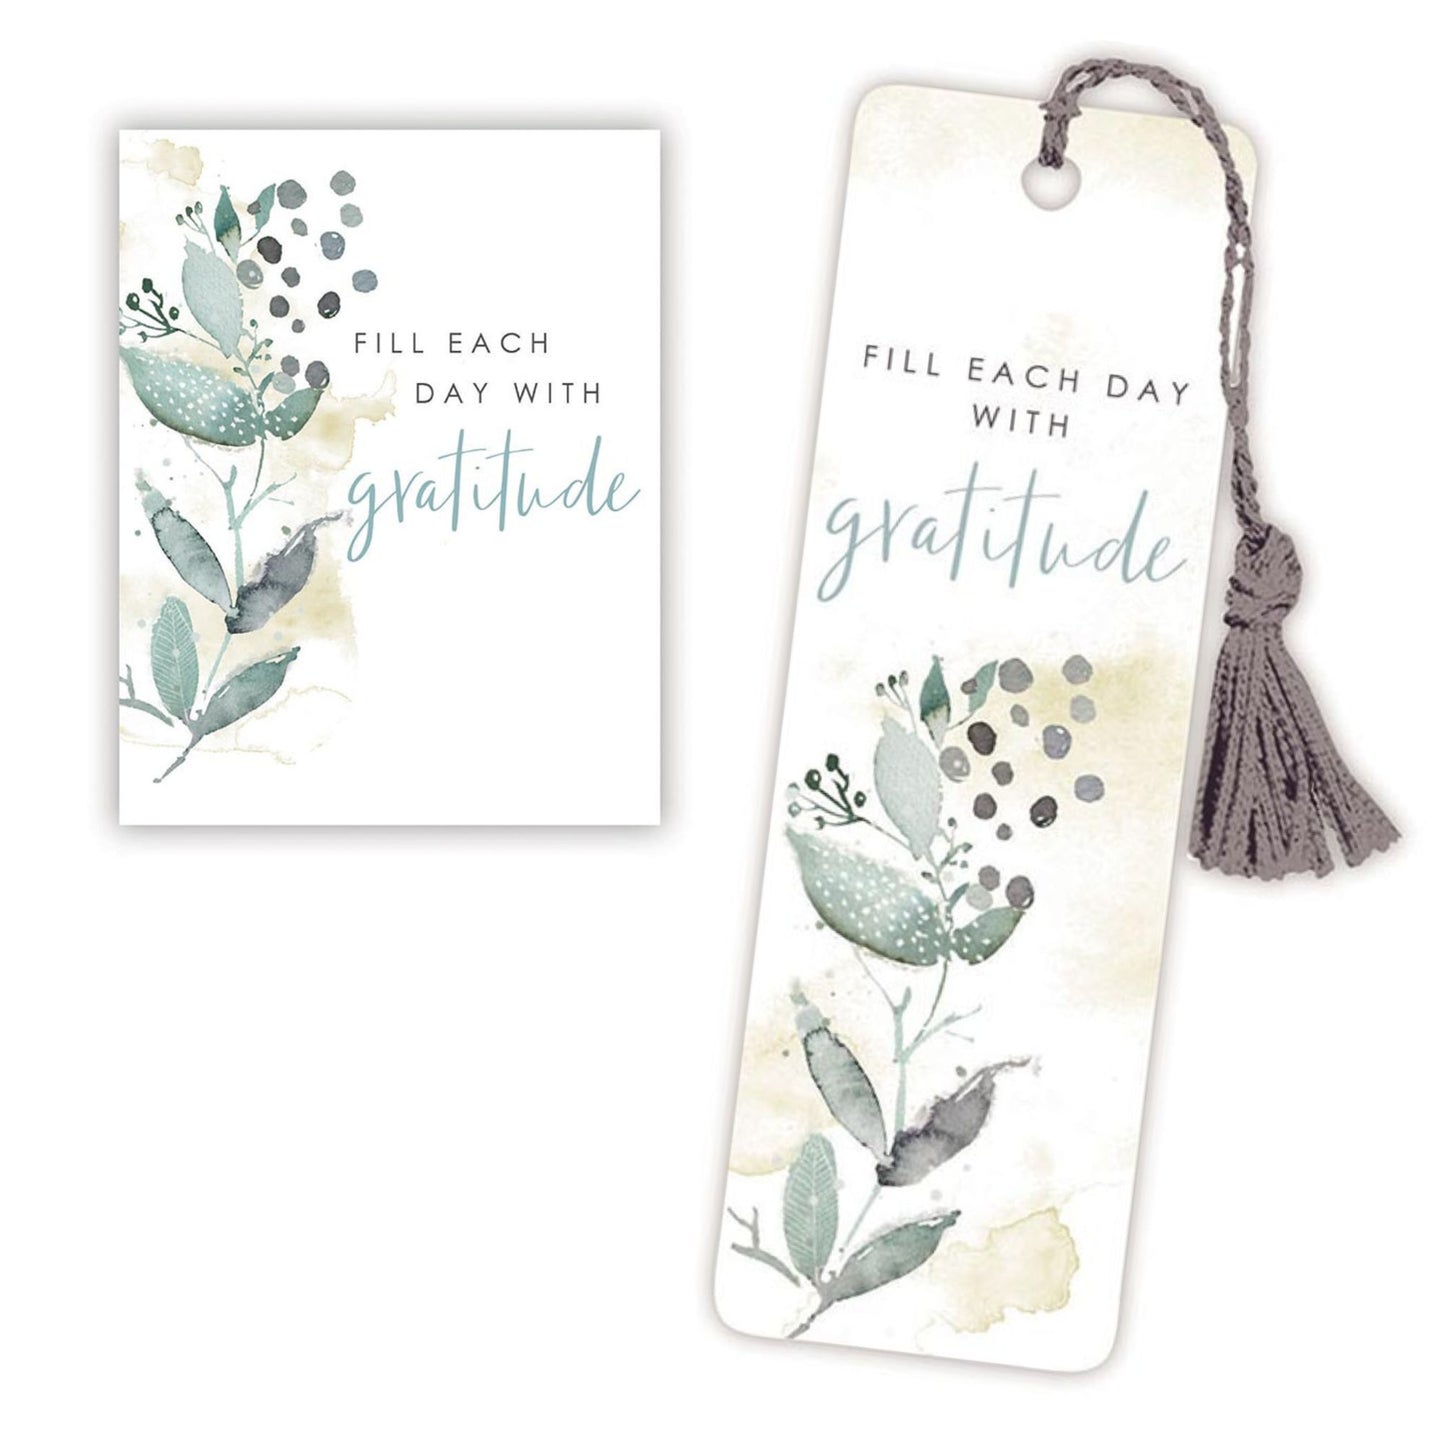 Fill Each Day with Gratitude - Inspirational Bookmark and Magnet Set | oak7west.com